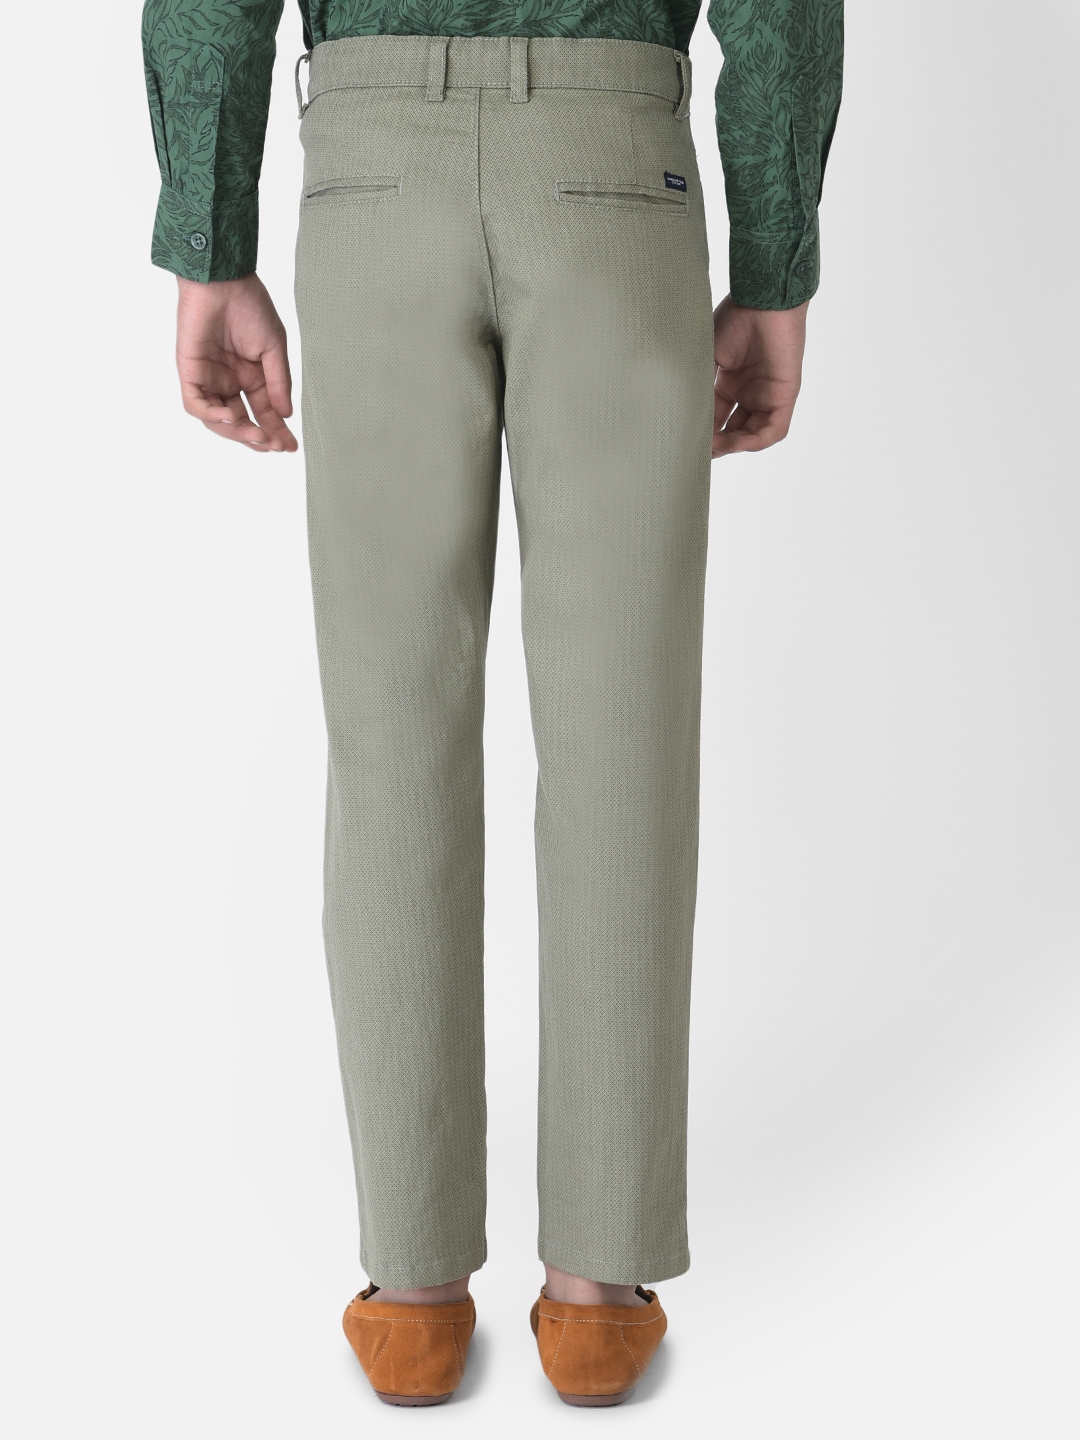 CRIMSOUNE CLUB Women Dark Khaki Straight Fit Trousers Buy CRIMSOUNE CLUB  Women Dark Khaki Straight Fit Trousers Online at Best Price in India  Nykaa